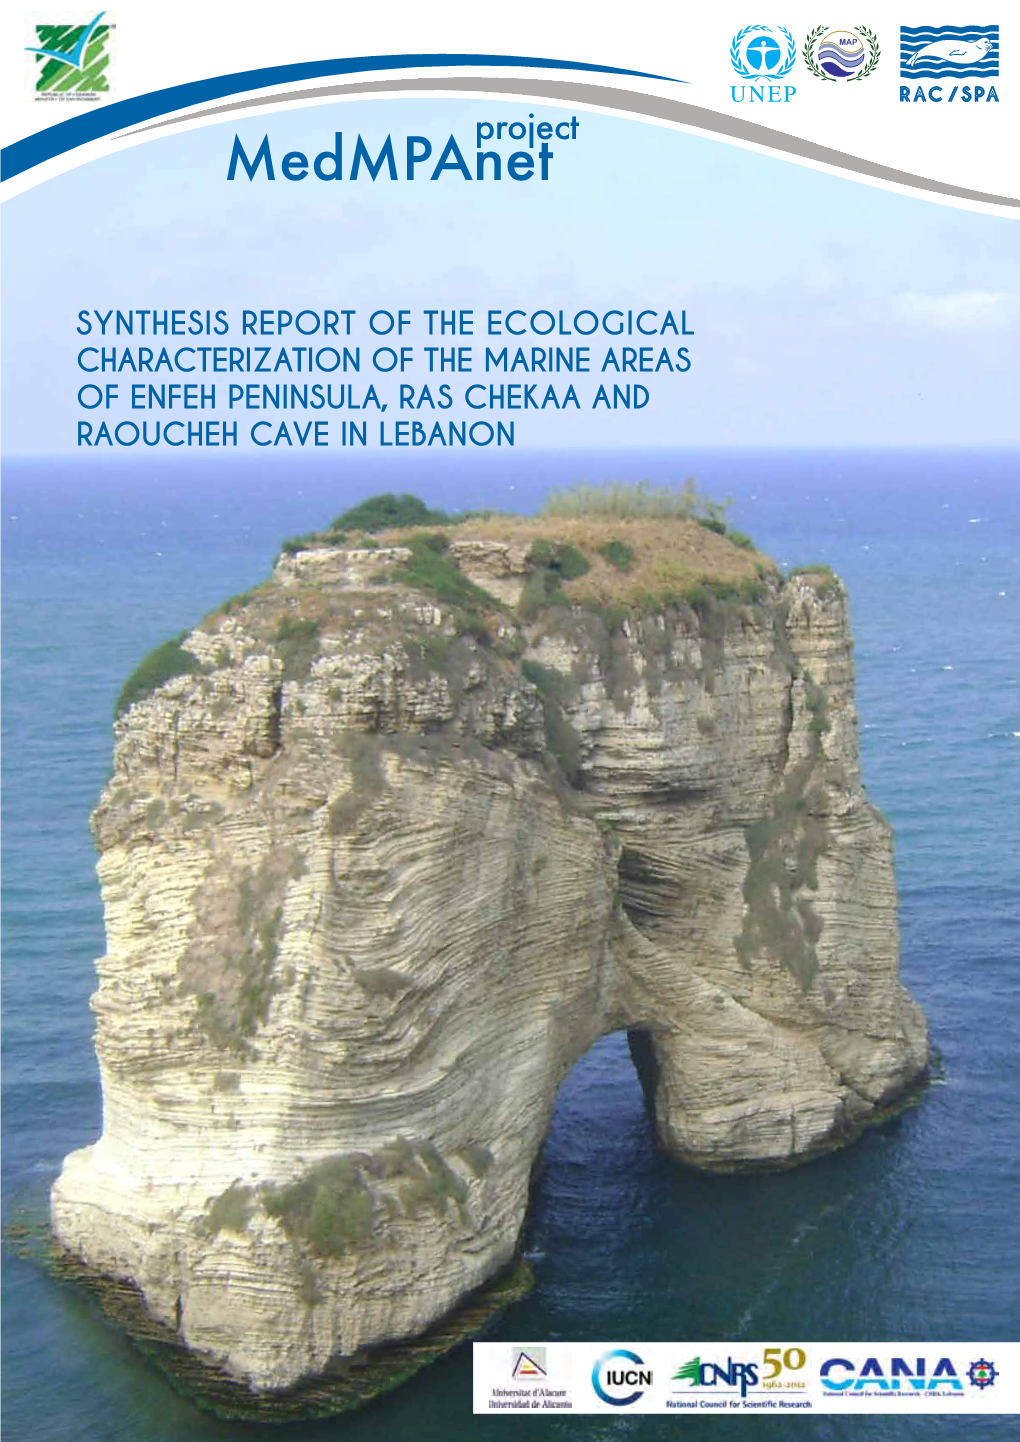 Synthesis Report of the Ecological Characterization of the Marine Areas of Enfeh Peninsula, Ras Chekaa and Raoucheh Cave in Lebanon